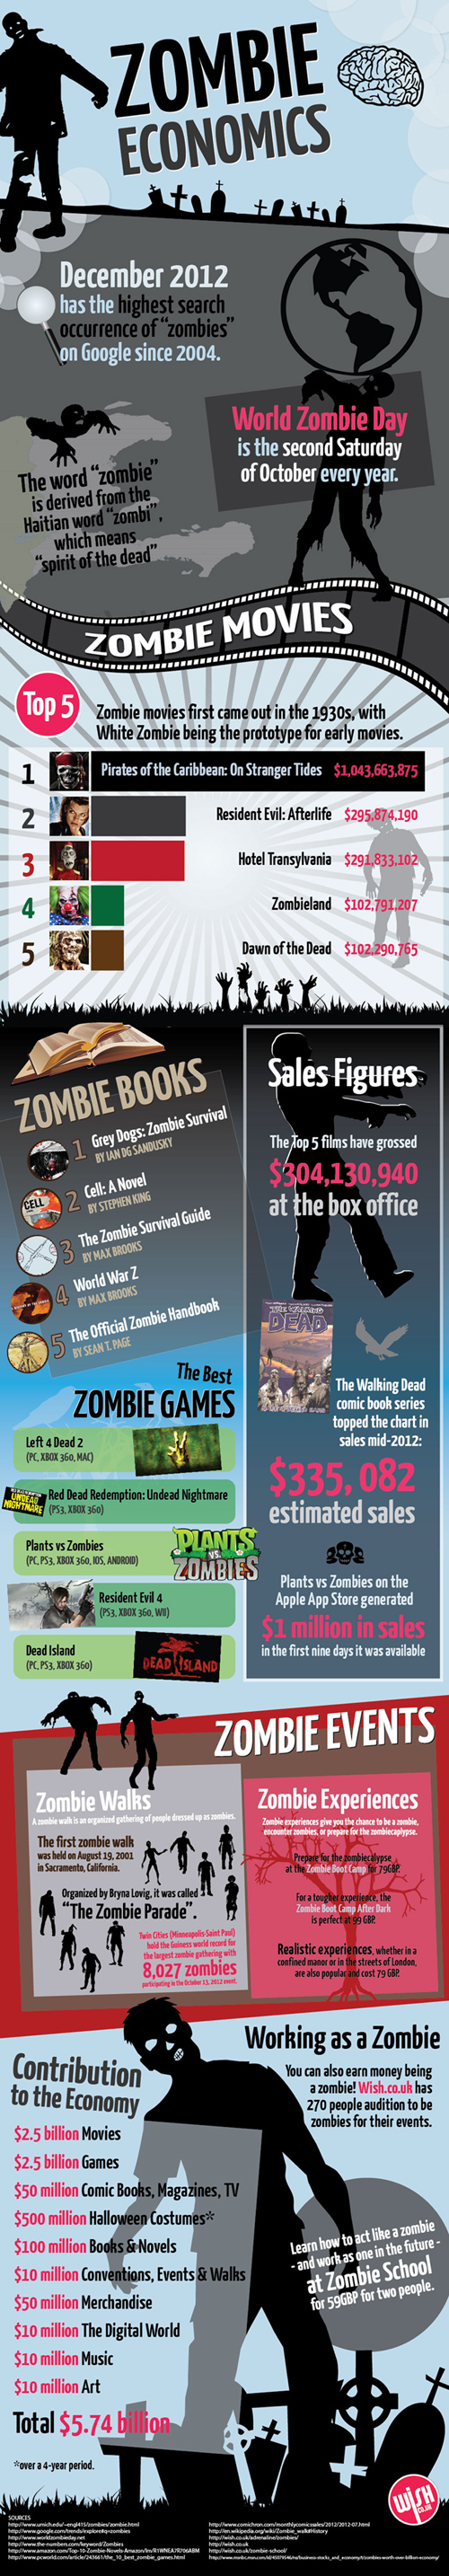 How Much is The Zombie Economy Worth?